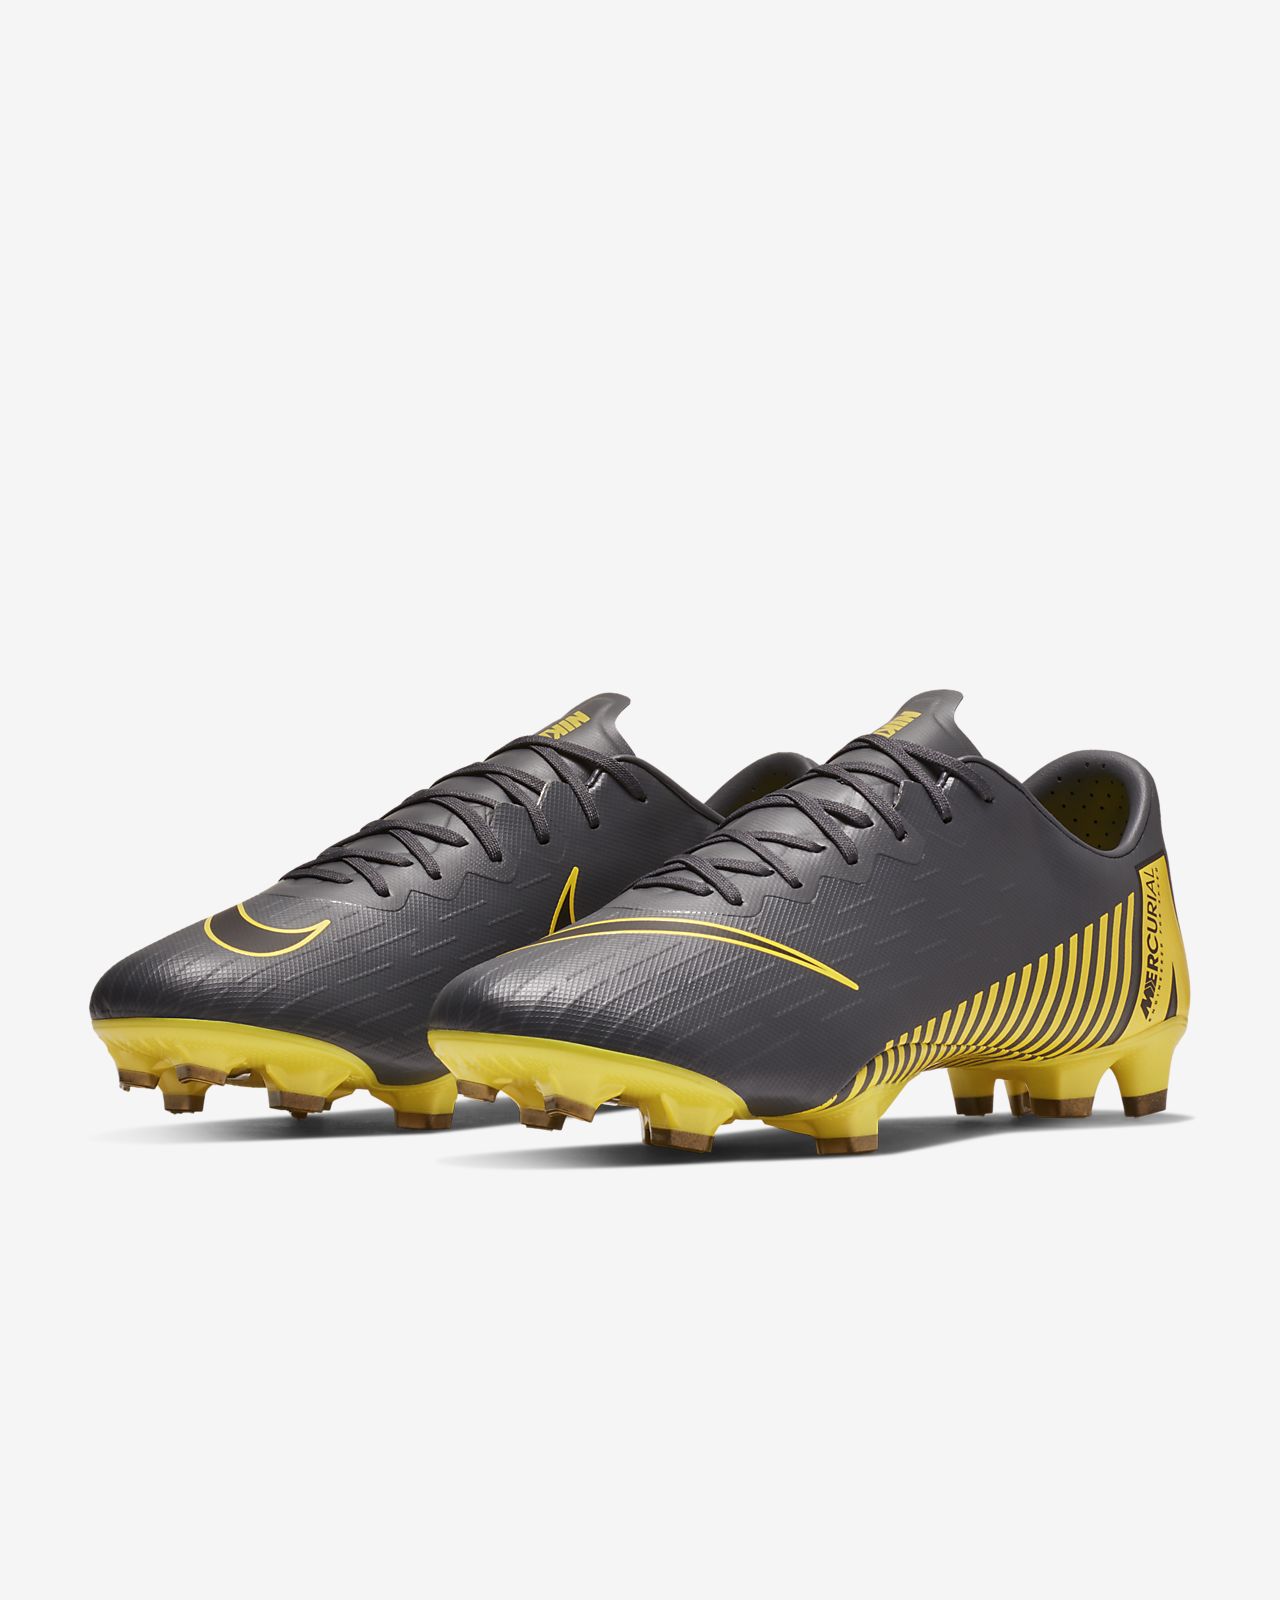 Nike Mercurial Vapor 12 XII Pro FG Mens Firm Ground Soccer Cleats Pick Size